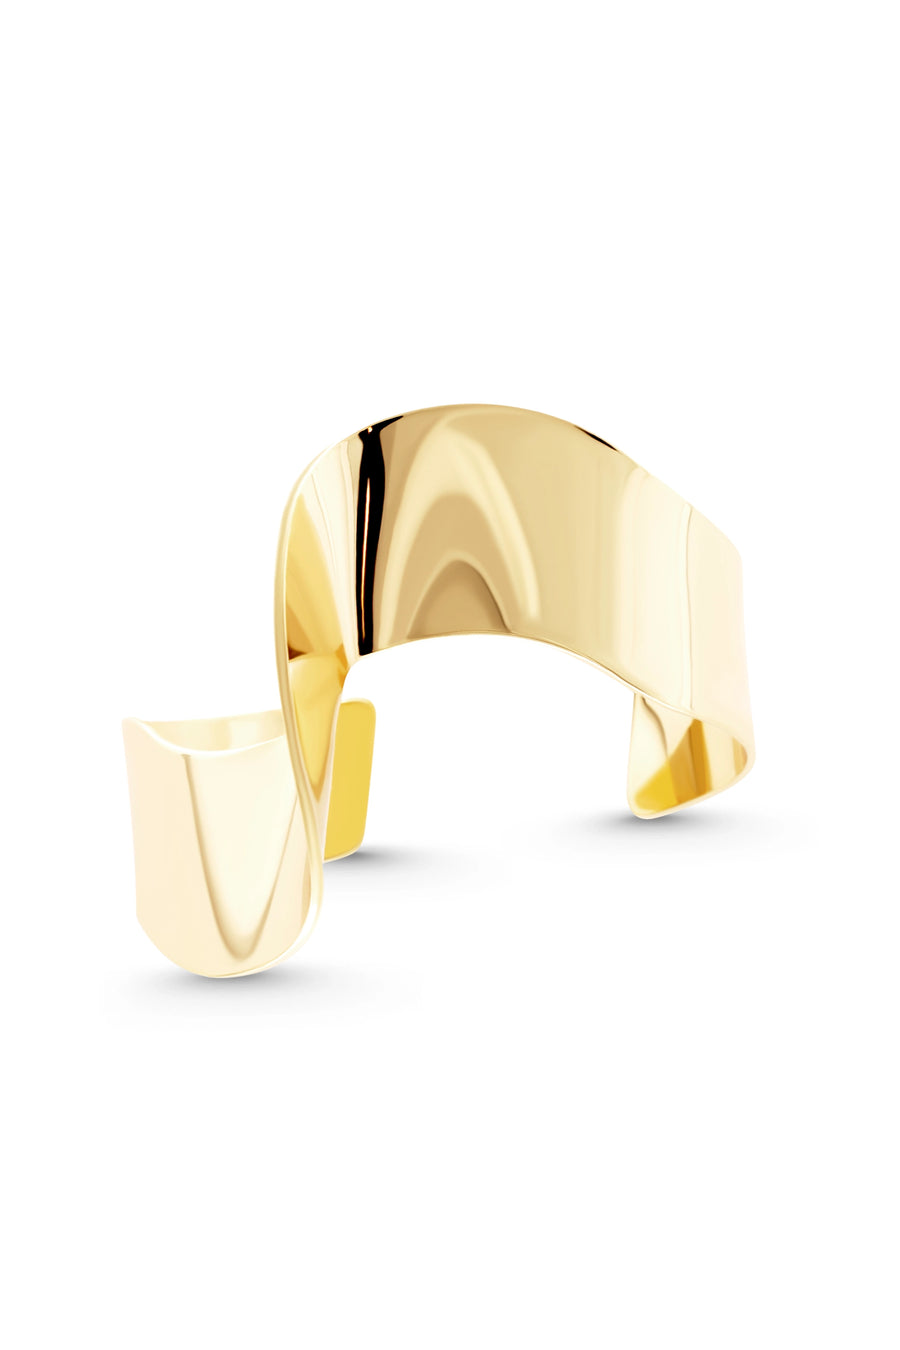 BEAMISH Cuff. Twisted plate cuff bracelet in high gloss finish, 18K gold vermeil, handmade, hypoallergenic, water-resistant